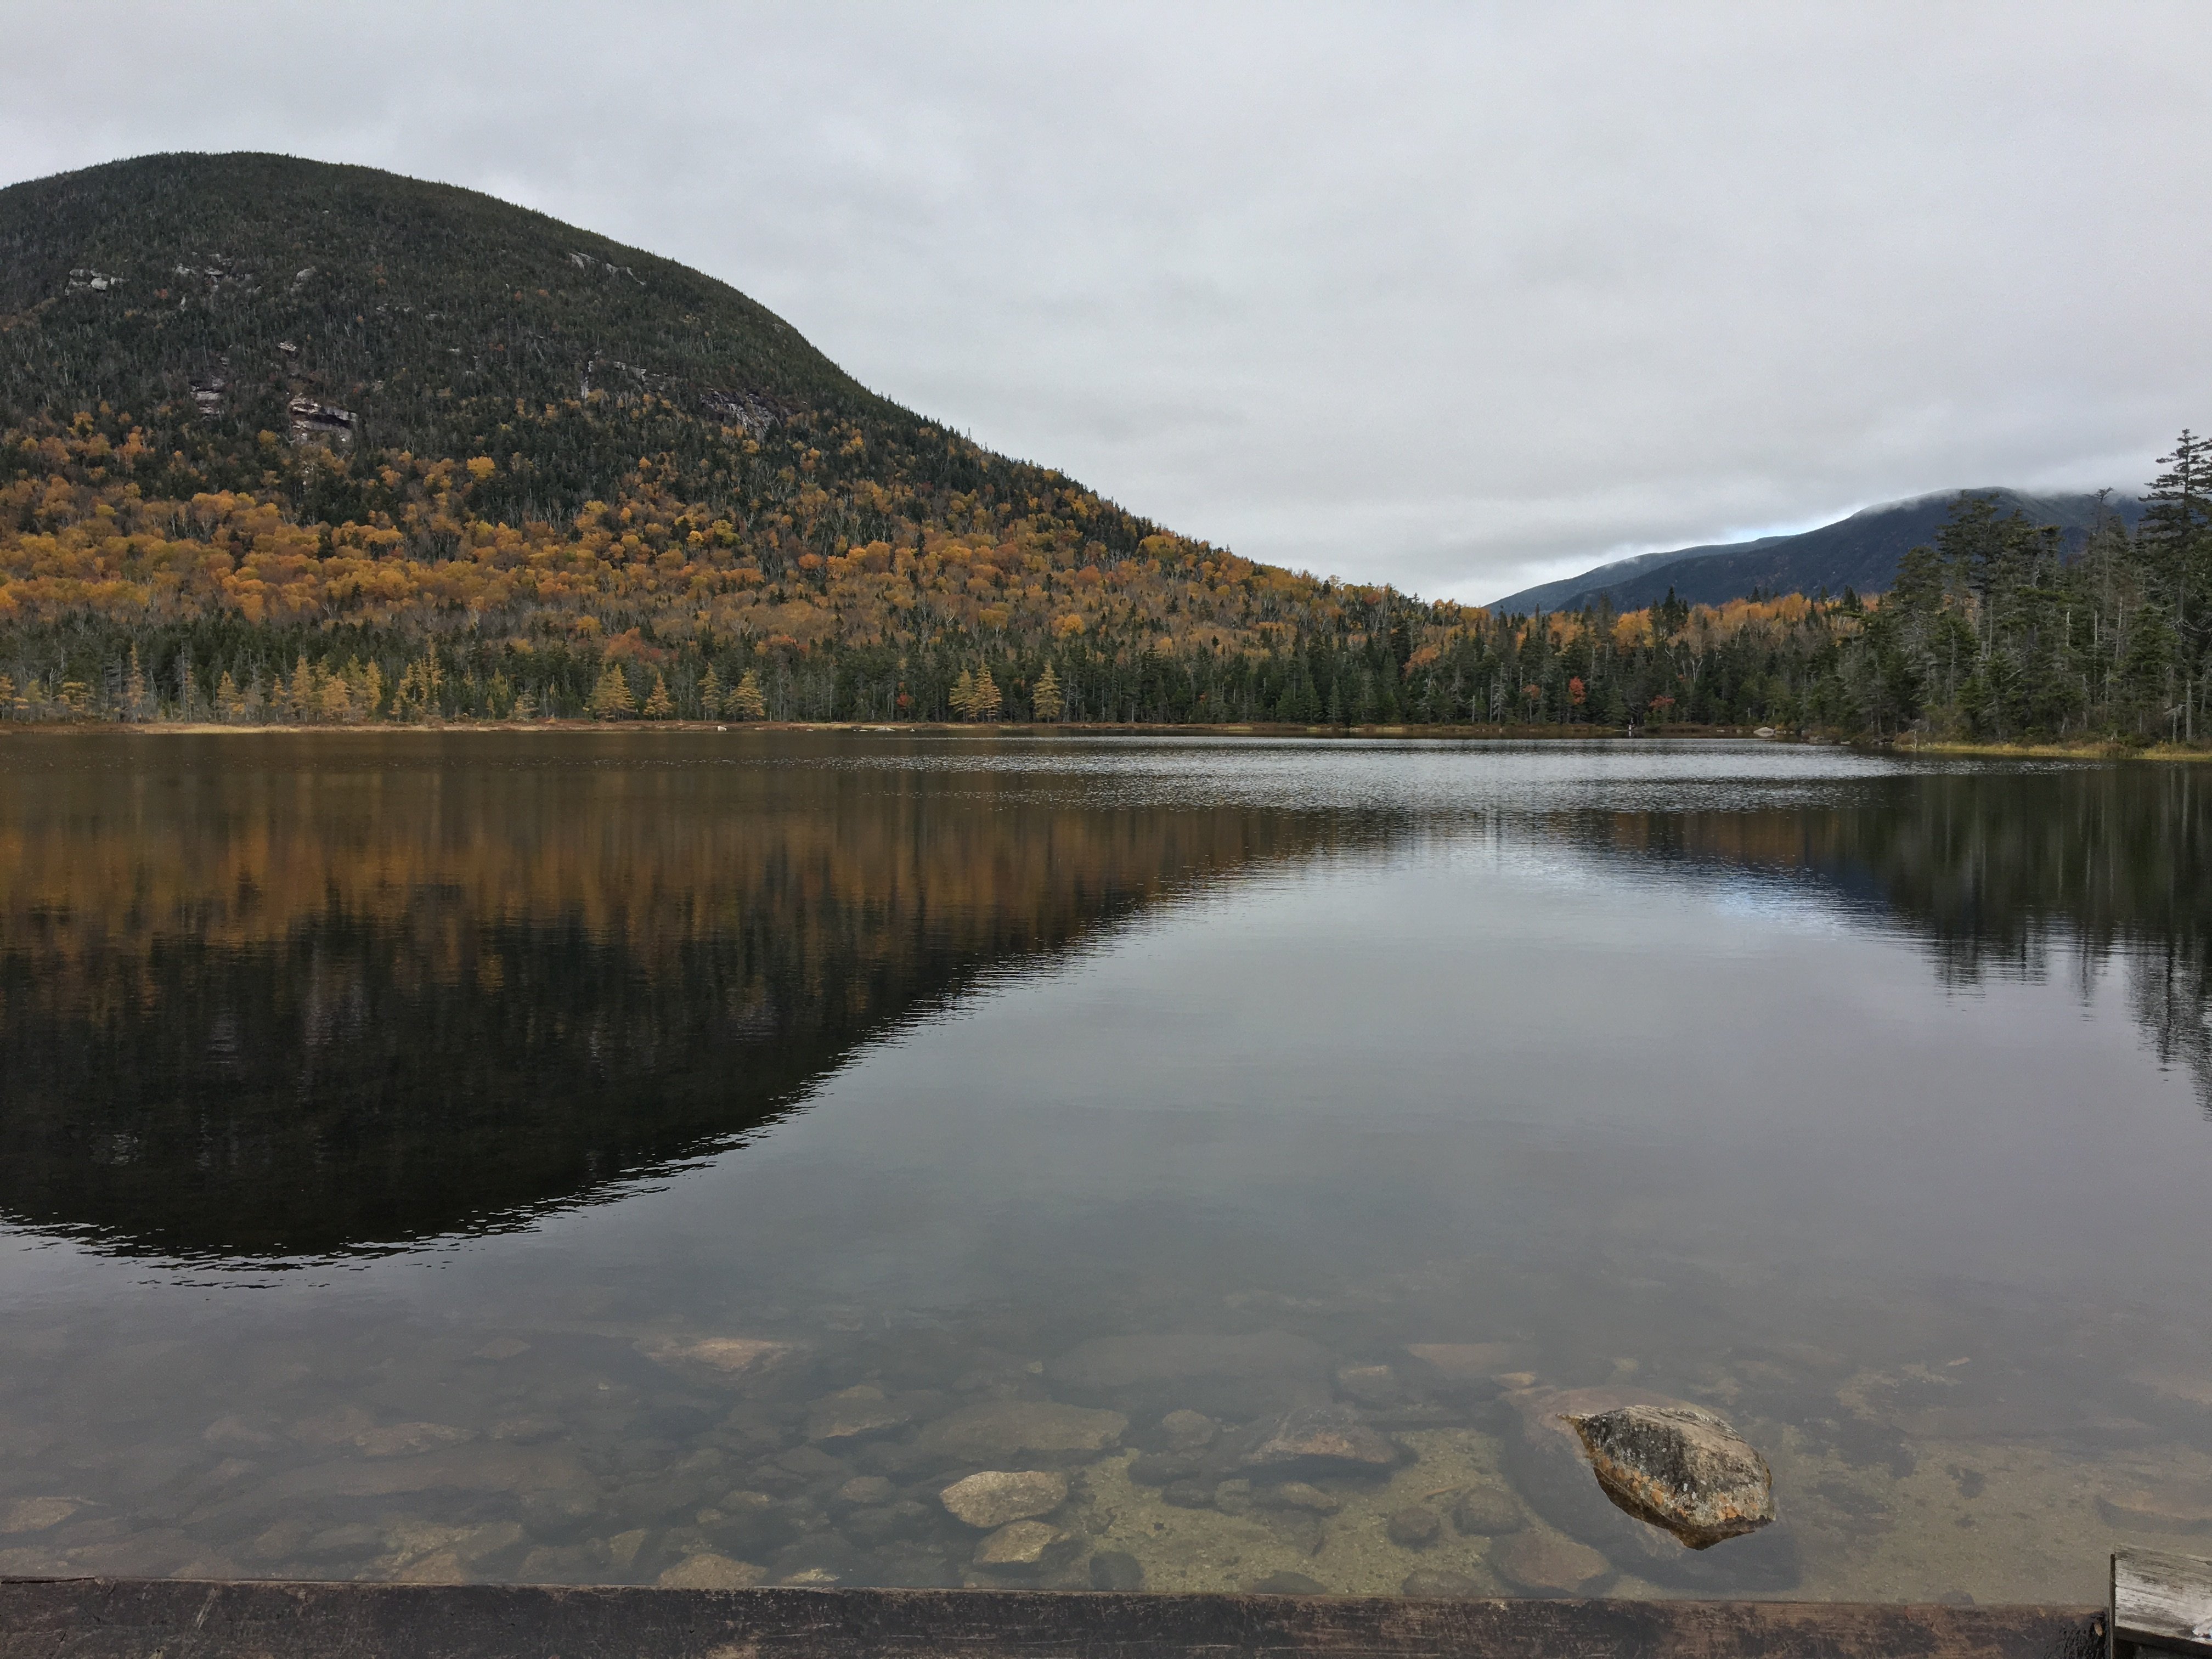 A very tranquil lake on a cloudy day. Across the lake is a mountain covered in yellow trees. Its reflection is clearly visible in the water.